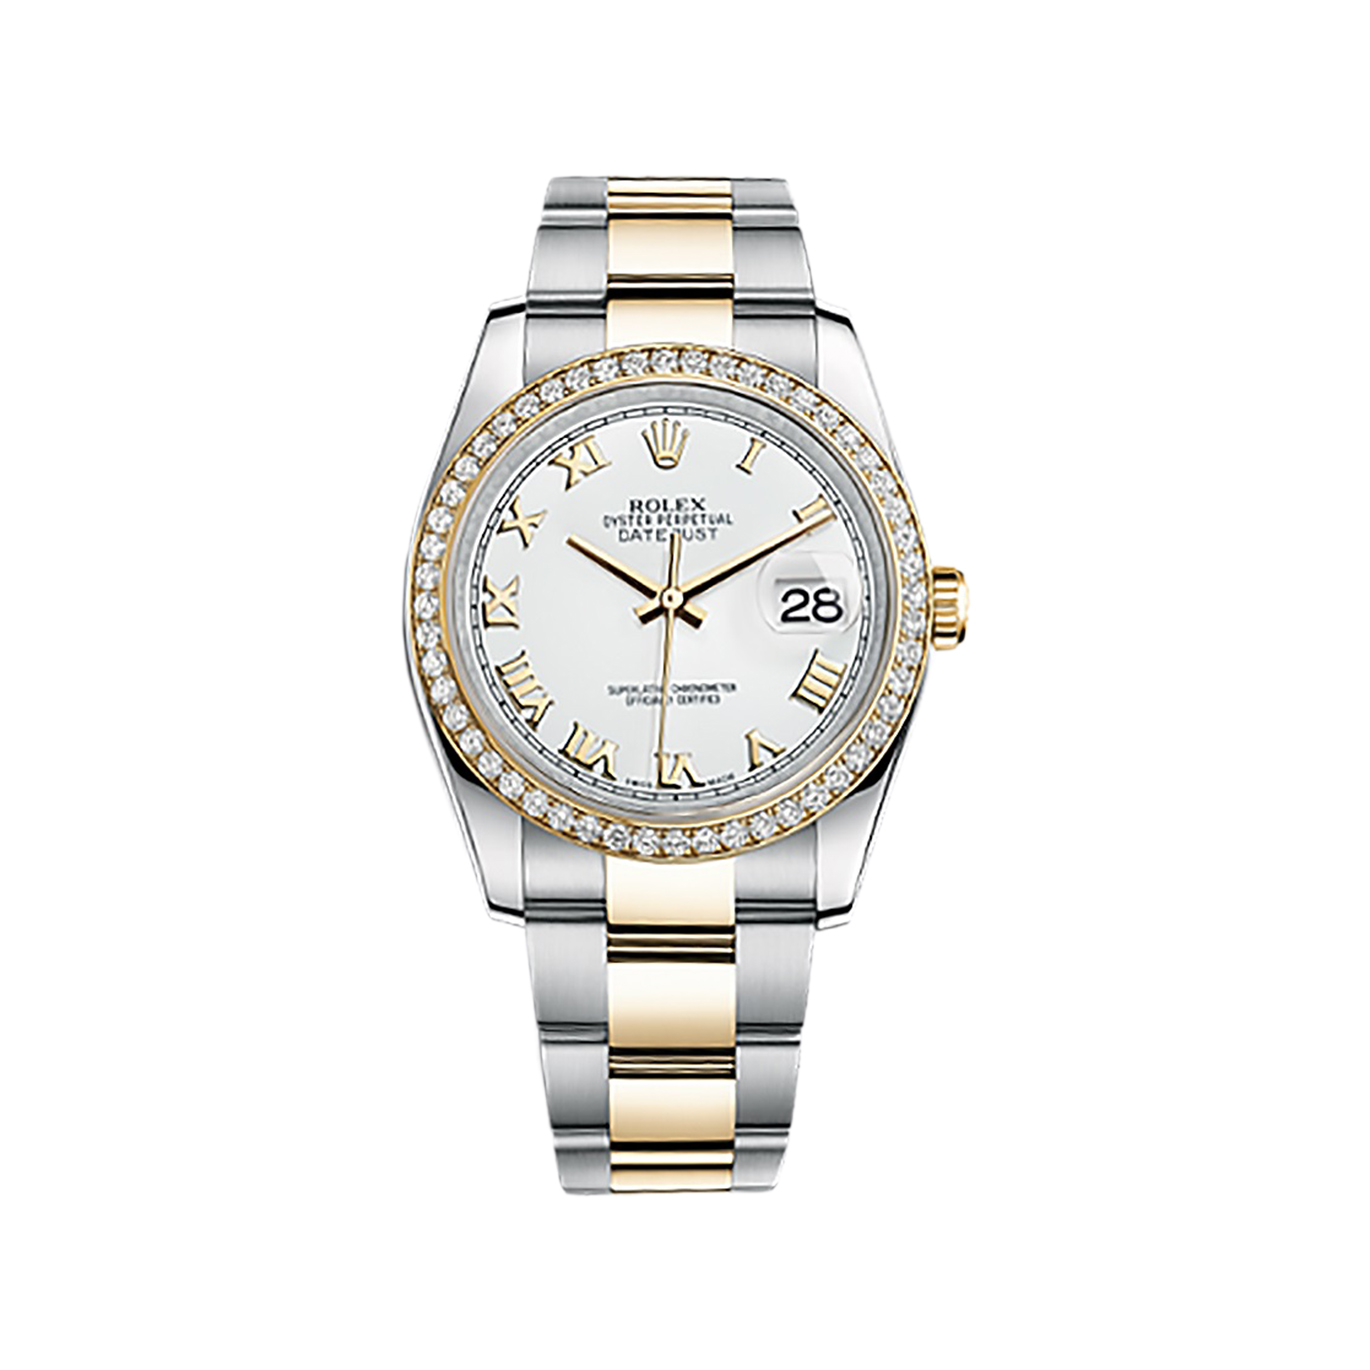 Datejust 36 116243 Gold & Stainless Steel Watch (White)